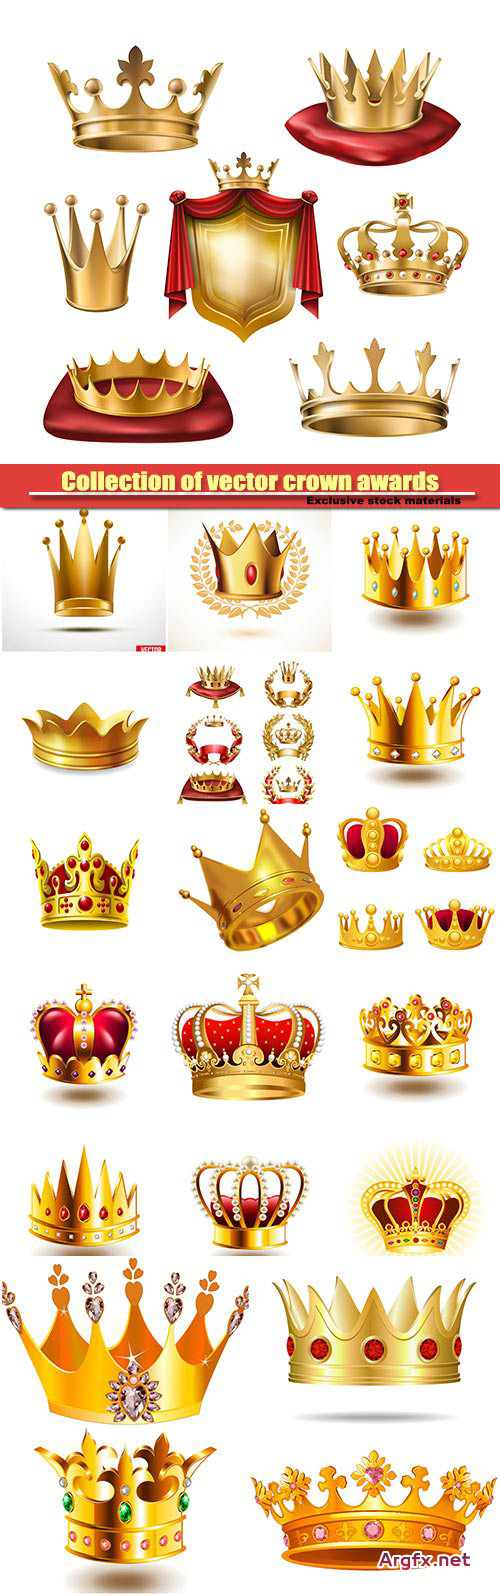  Collection of vector crown awards for winners of competitions, design elements for a label, certificate, diploma